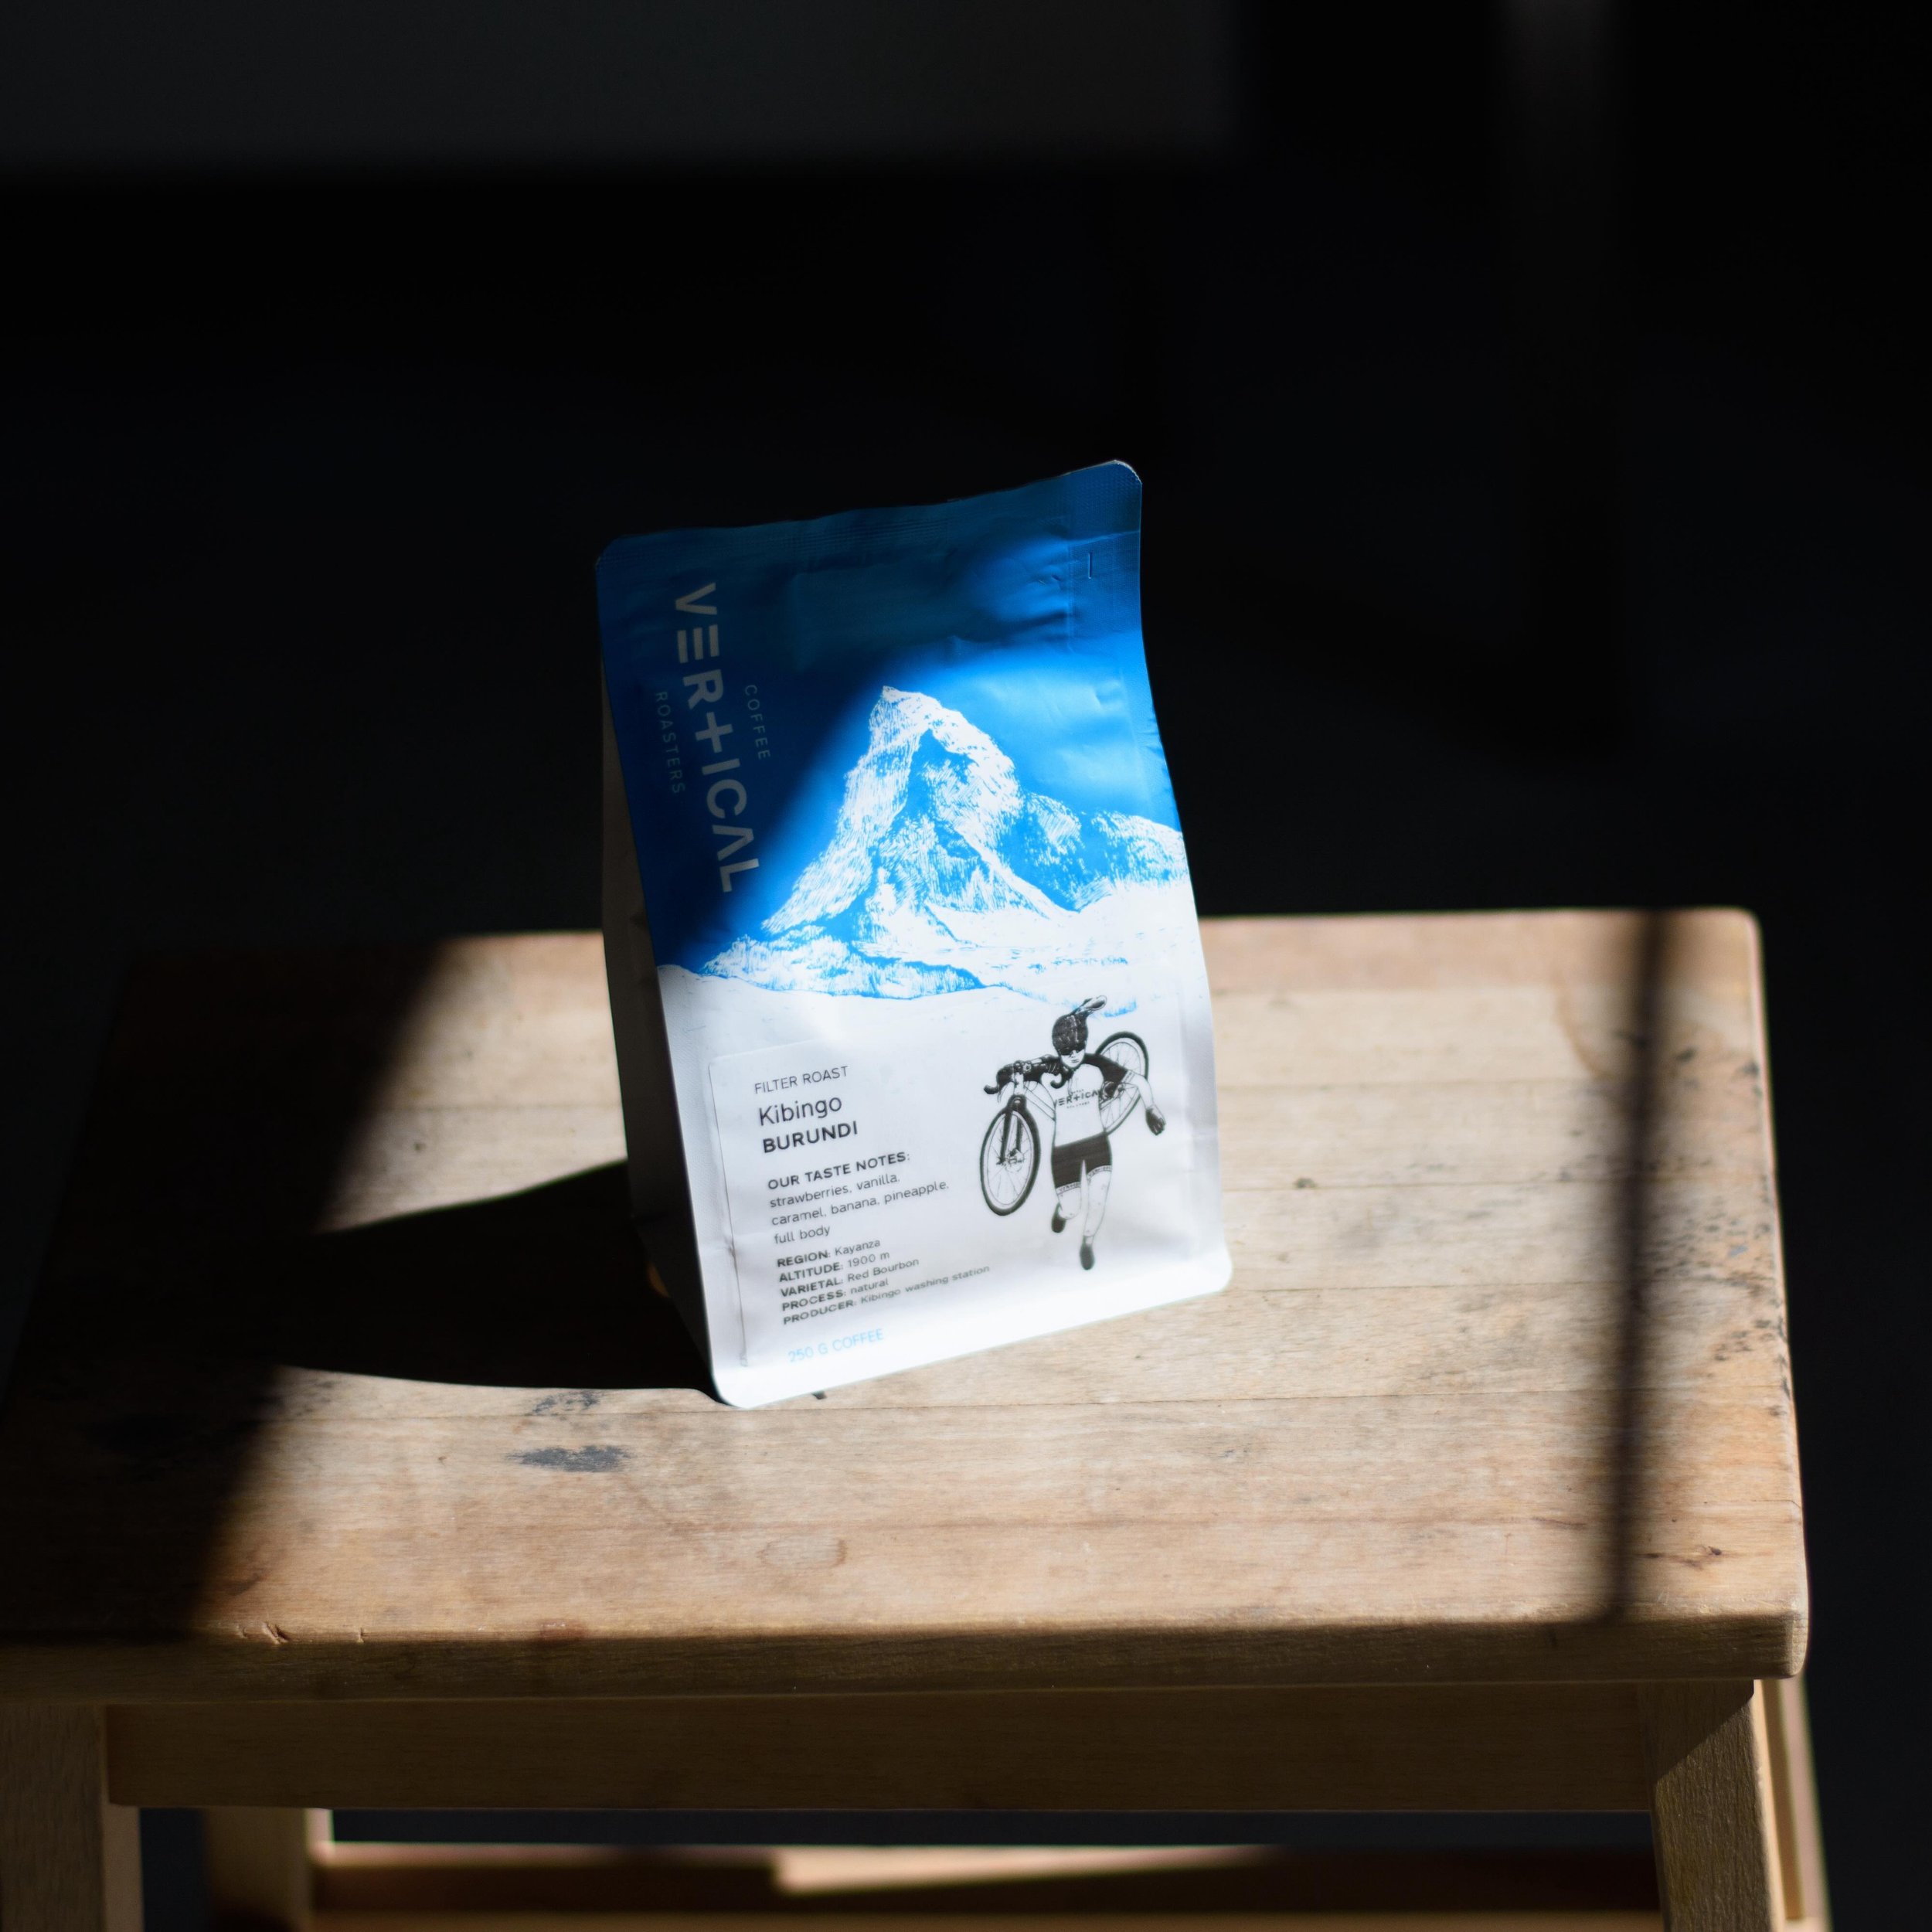 Here to take over from Kenya Ichuga is another fruit bomb 💙 Burundi Kibingo natural filter roast 💙 with flavour notes of strawberry, vanilla and caramel 💙 Some of you will have tasted the espresso roast 💙 now it&lsquo;s also bridging the gap unti